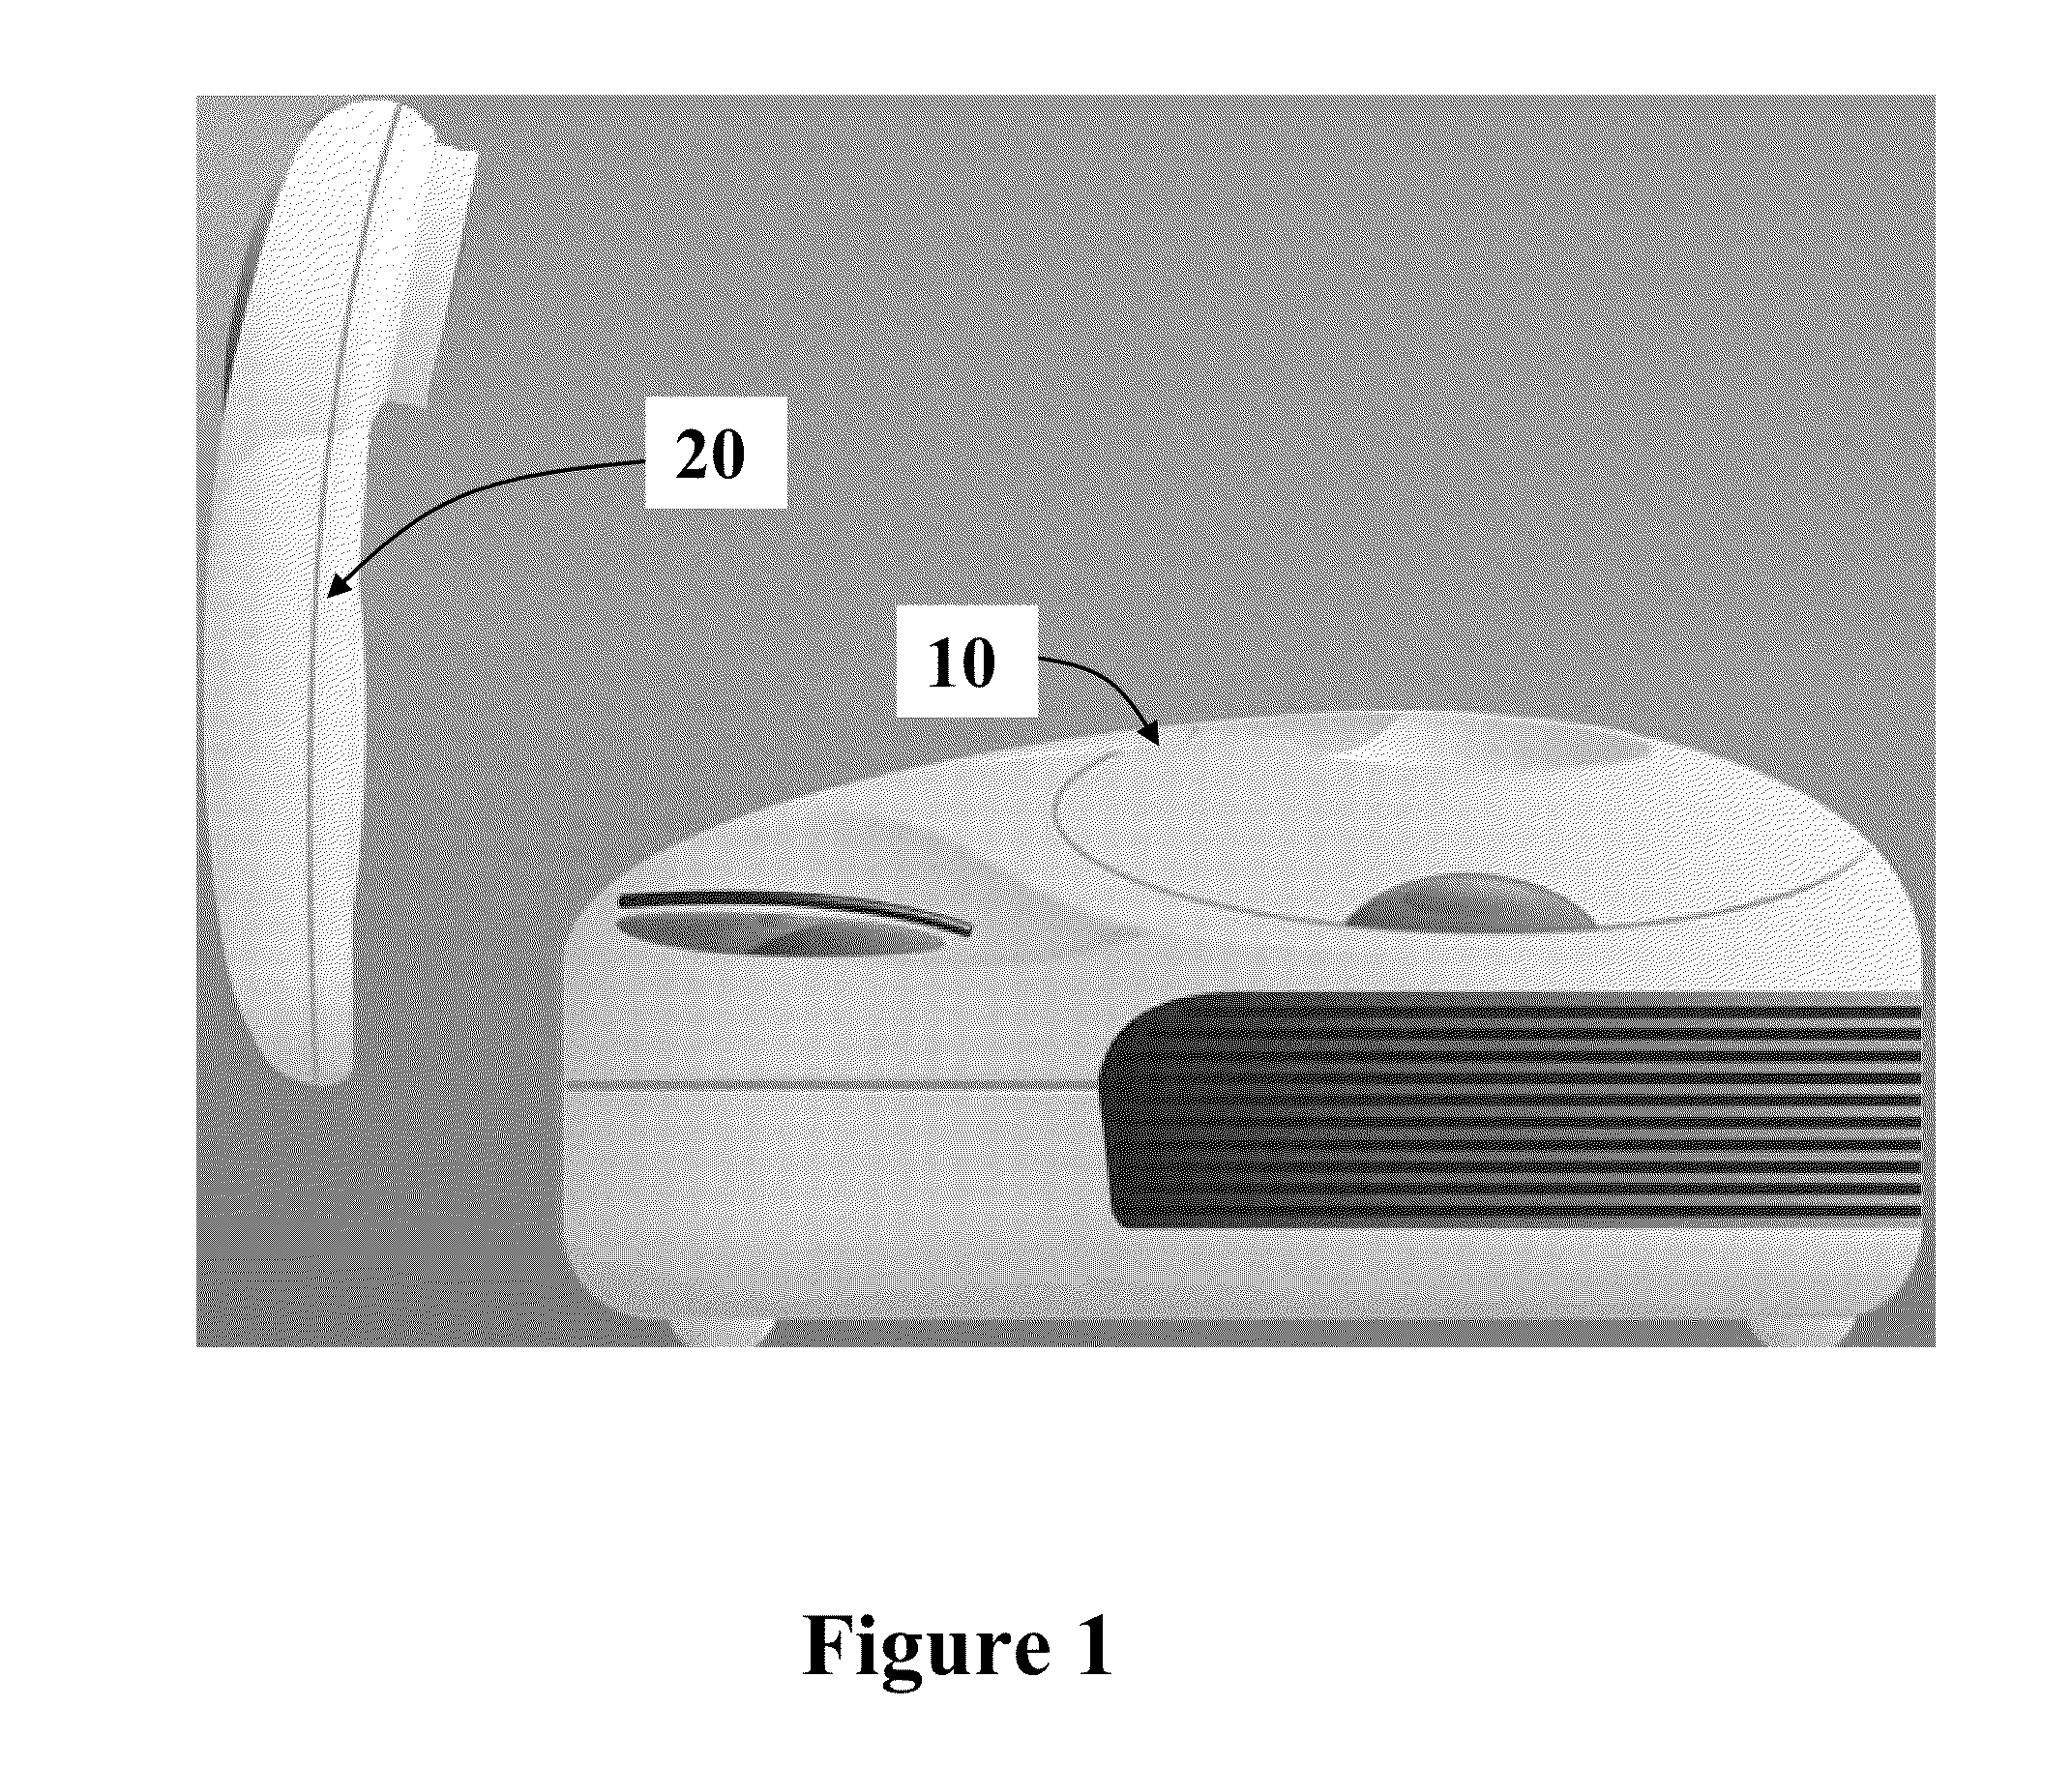 Methods and Apparatus for Personal Care